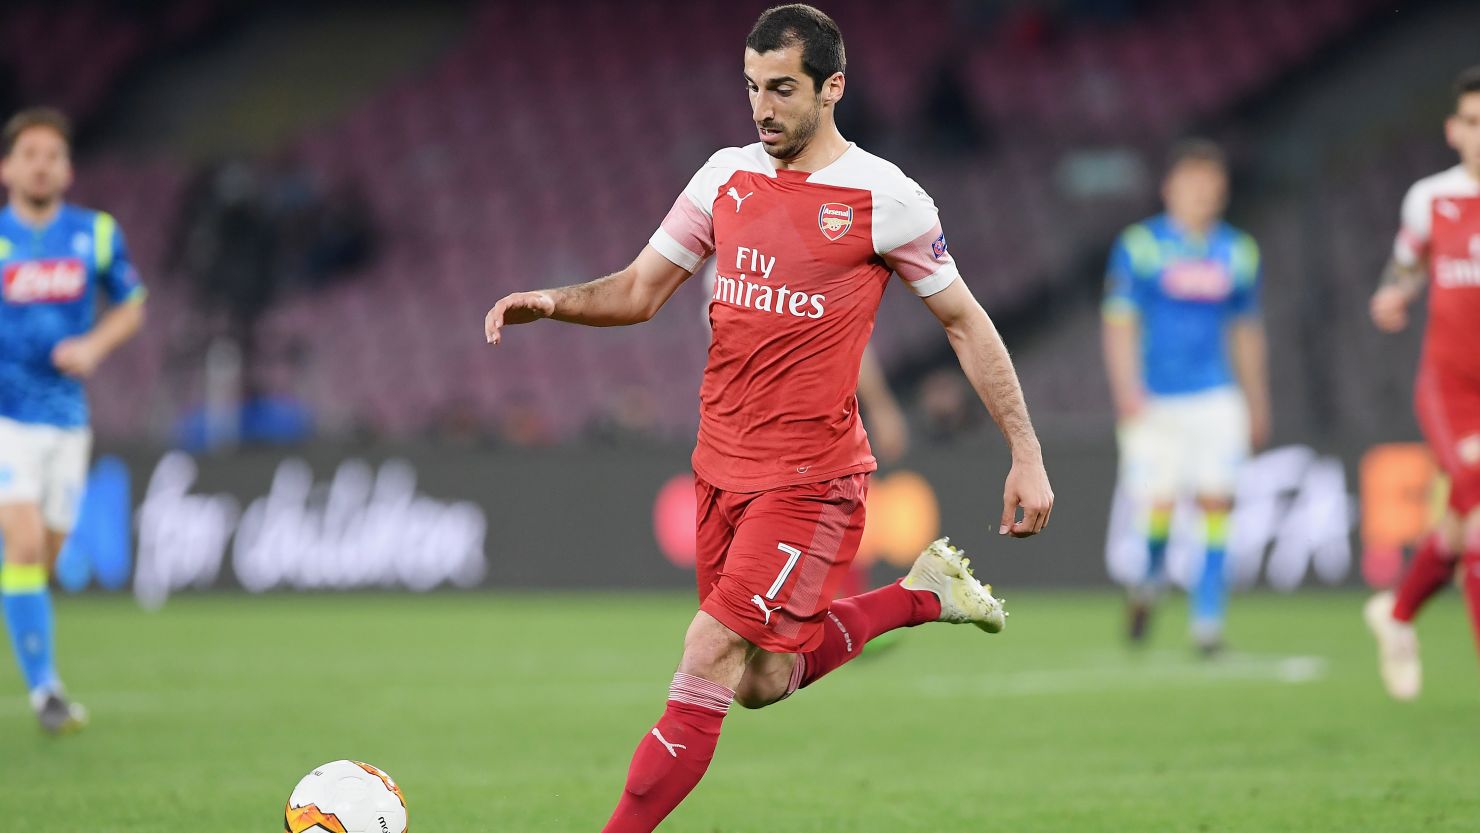 Henrikh Mkhitaryan in talks with Arsenal over missing Europa League final, Football News